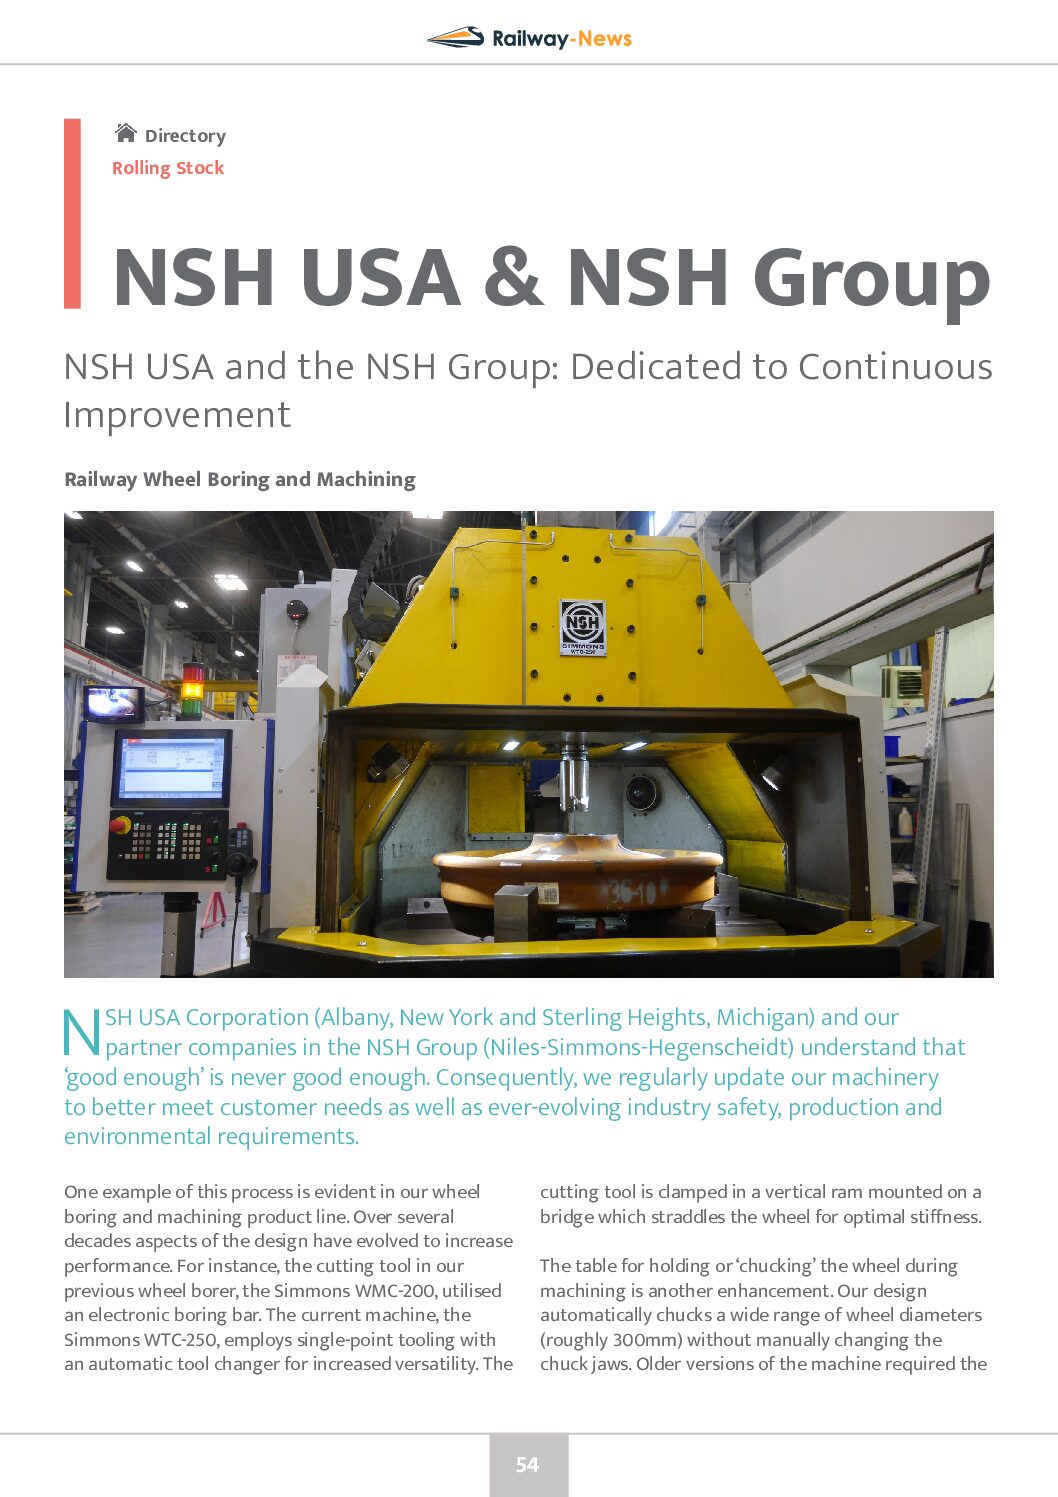 NSH USA and the NSH Group: Dedicated to Continuous Improvement